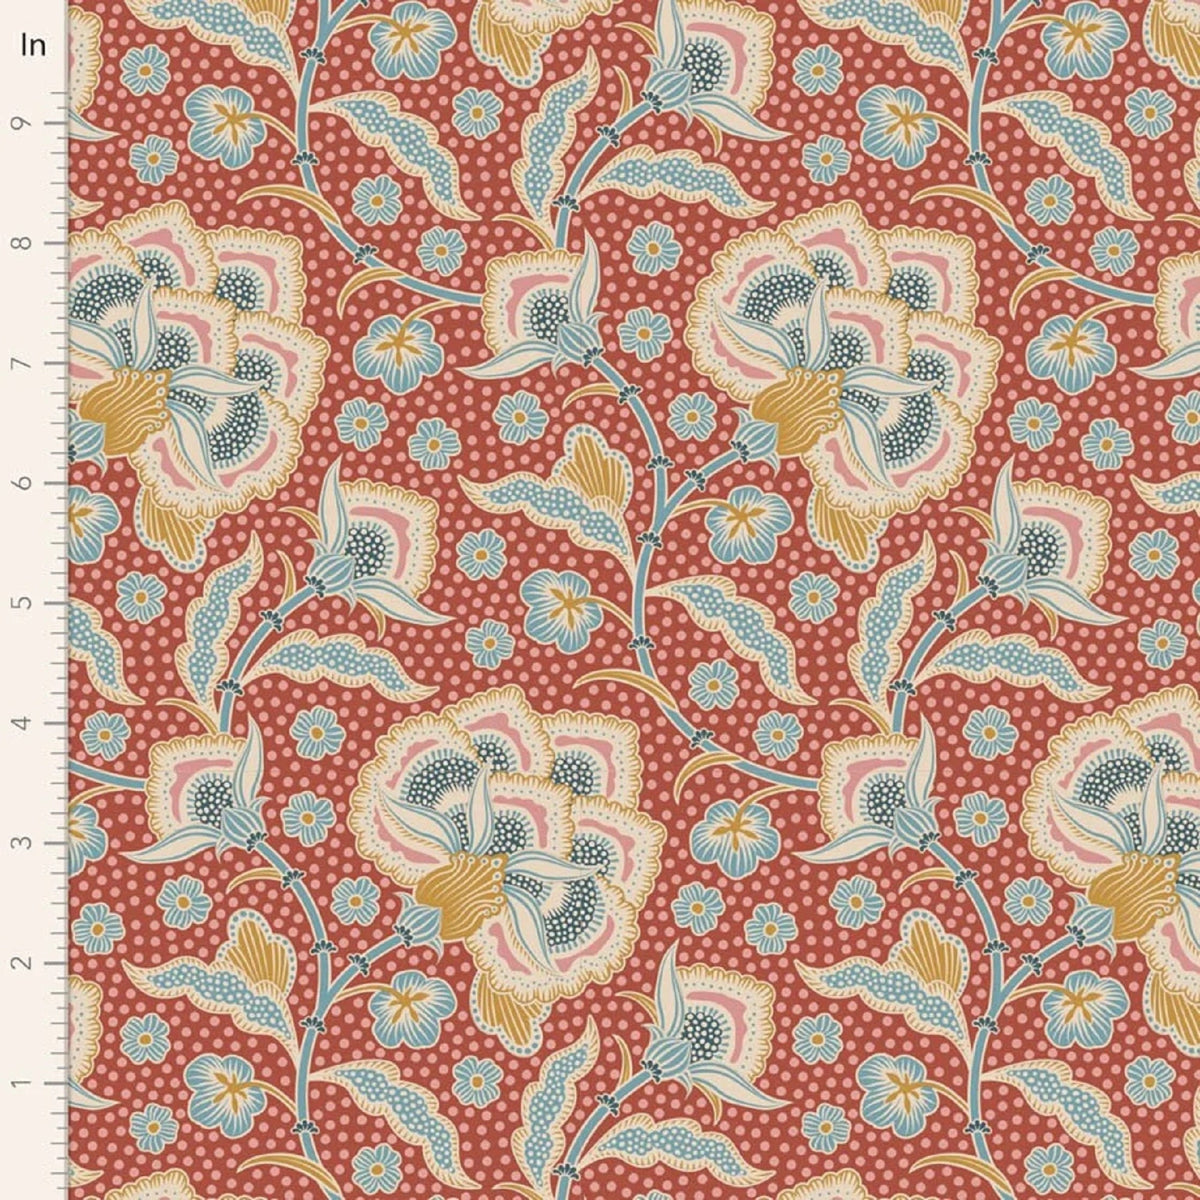 Stay up to date with our Eden Rust - Hometown - Tilda Fabric - Tone ...